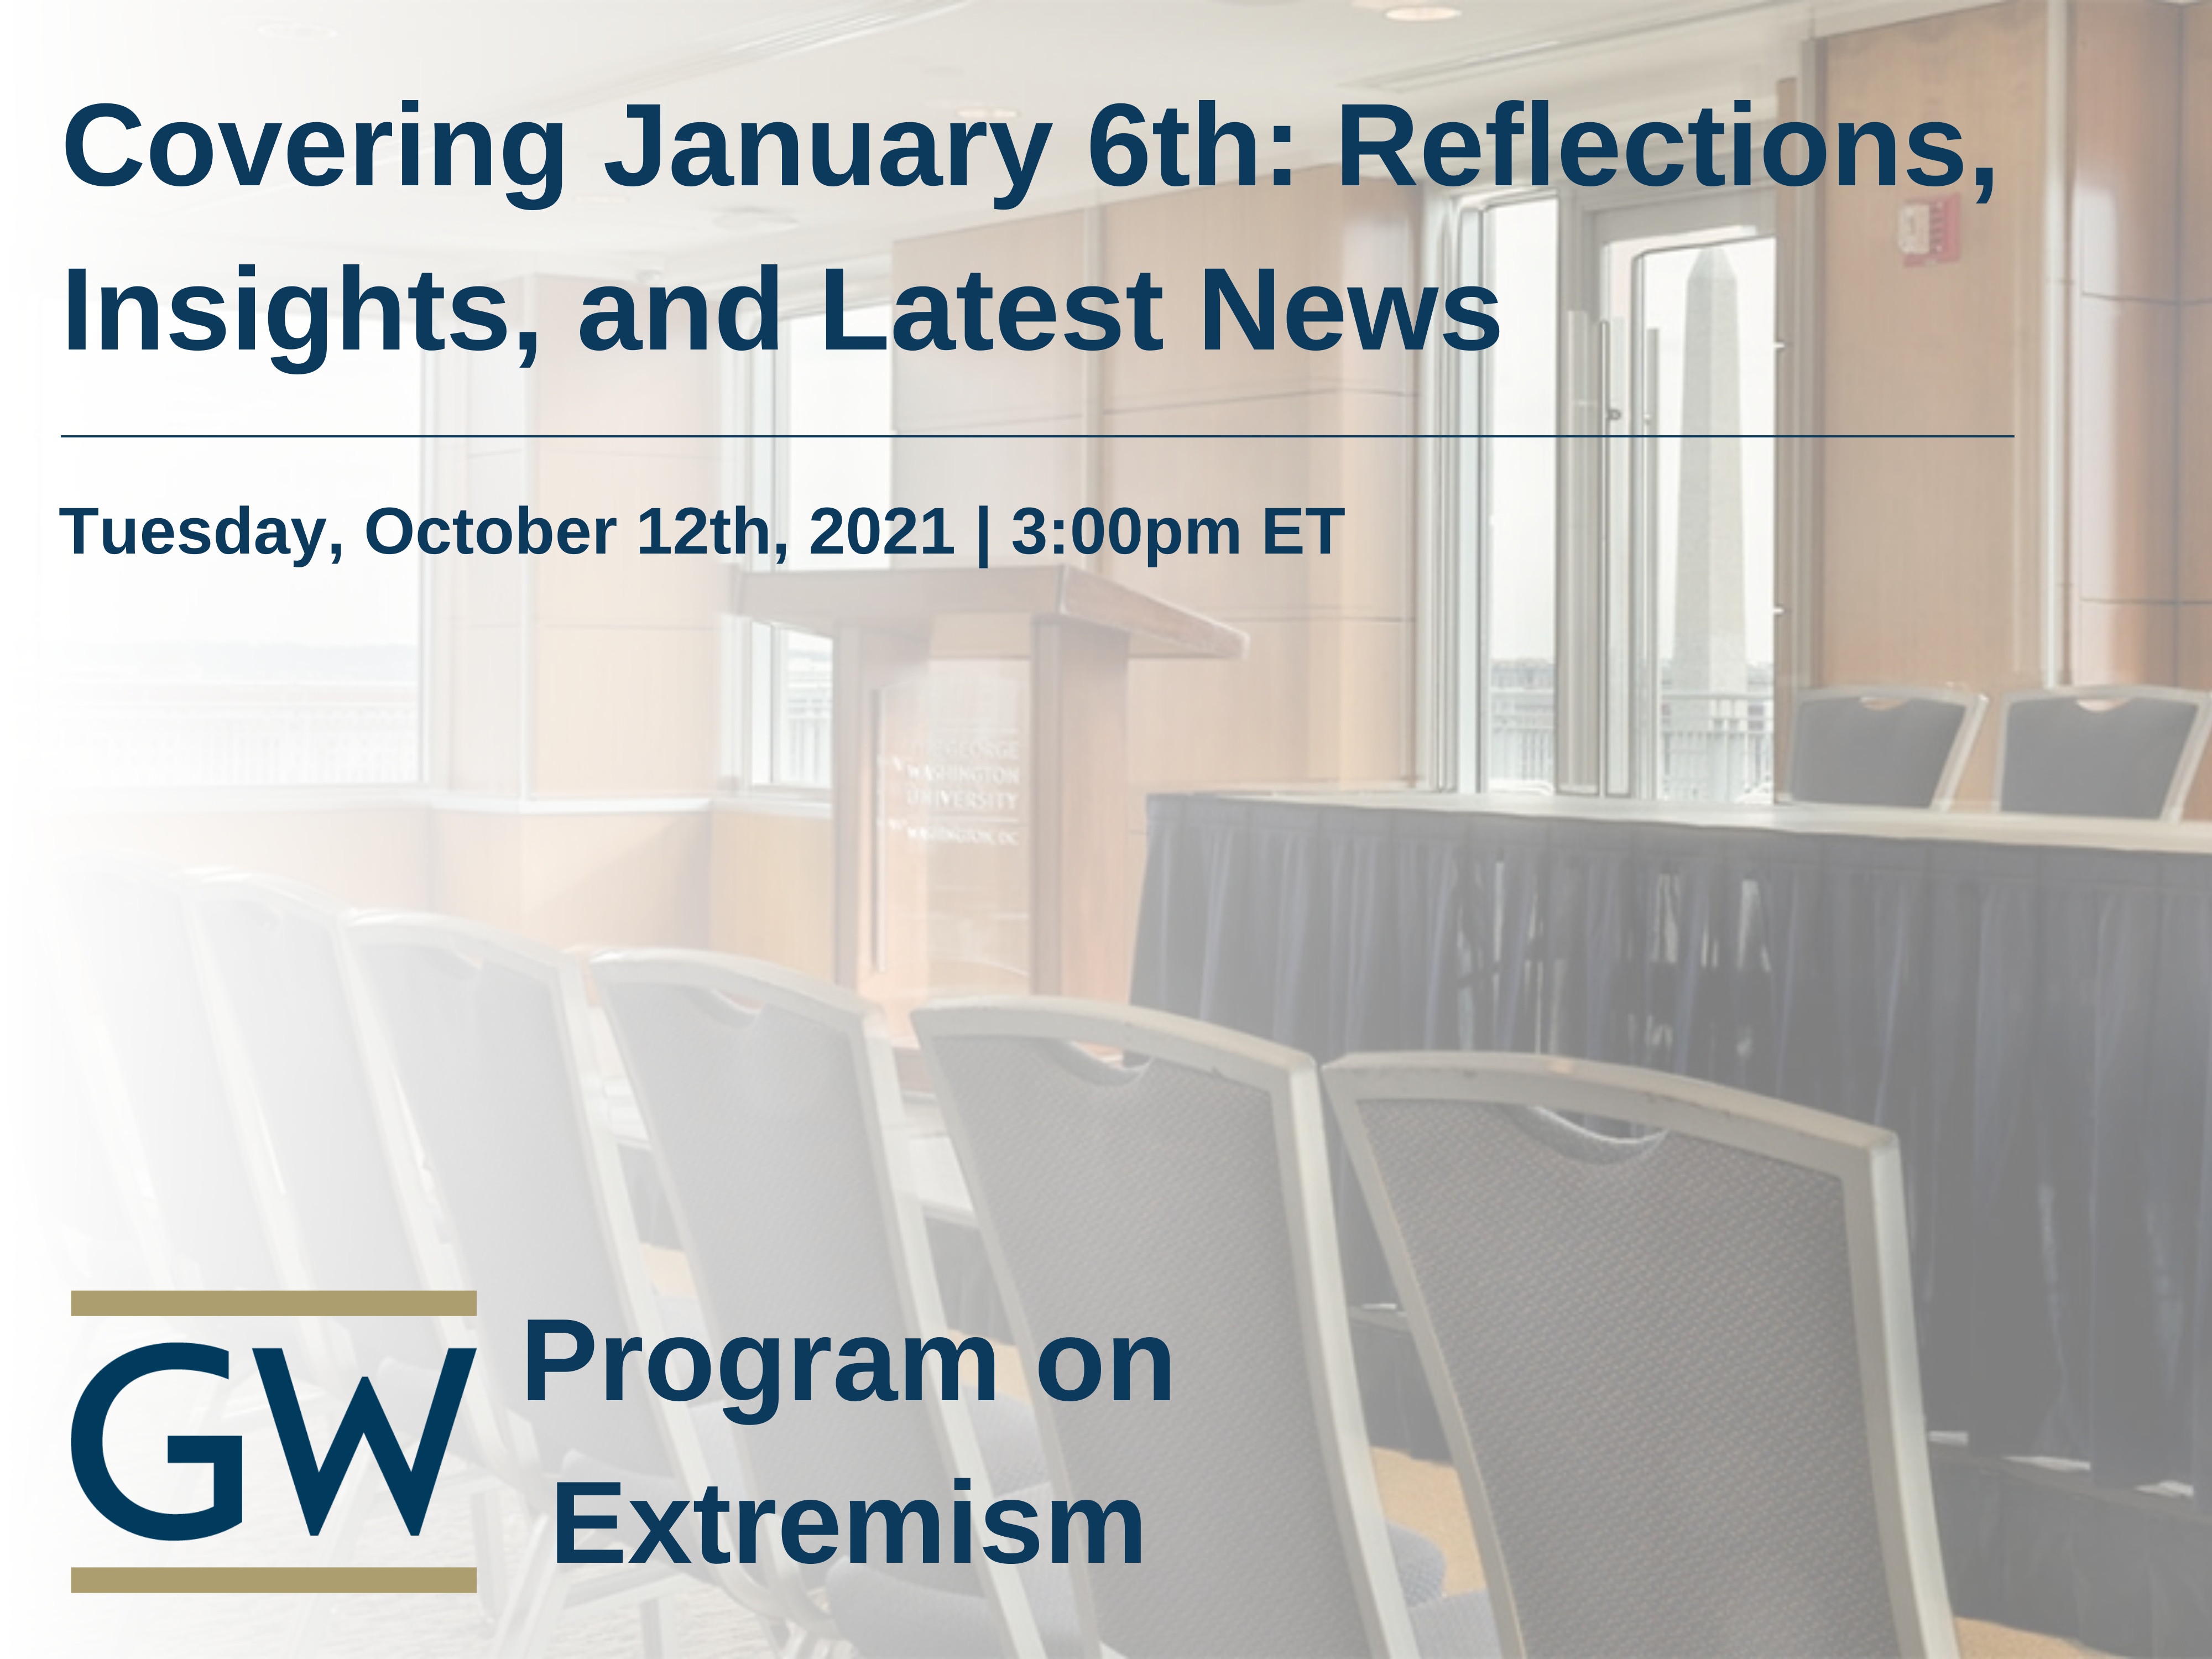 Covering January 6th: Reflections, Insights, and Latest News Event Banner